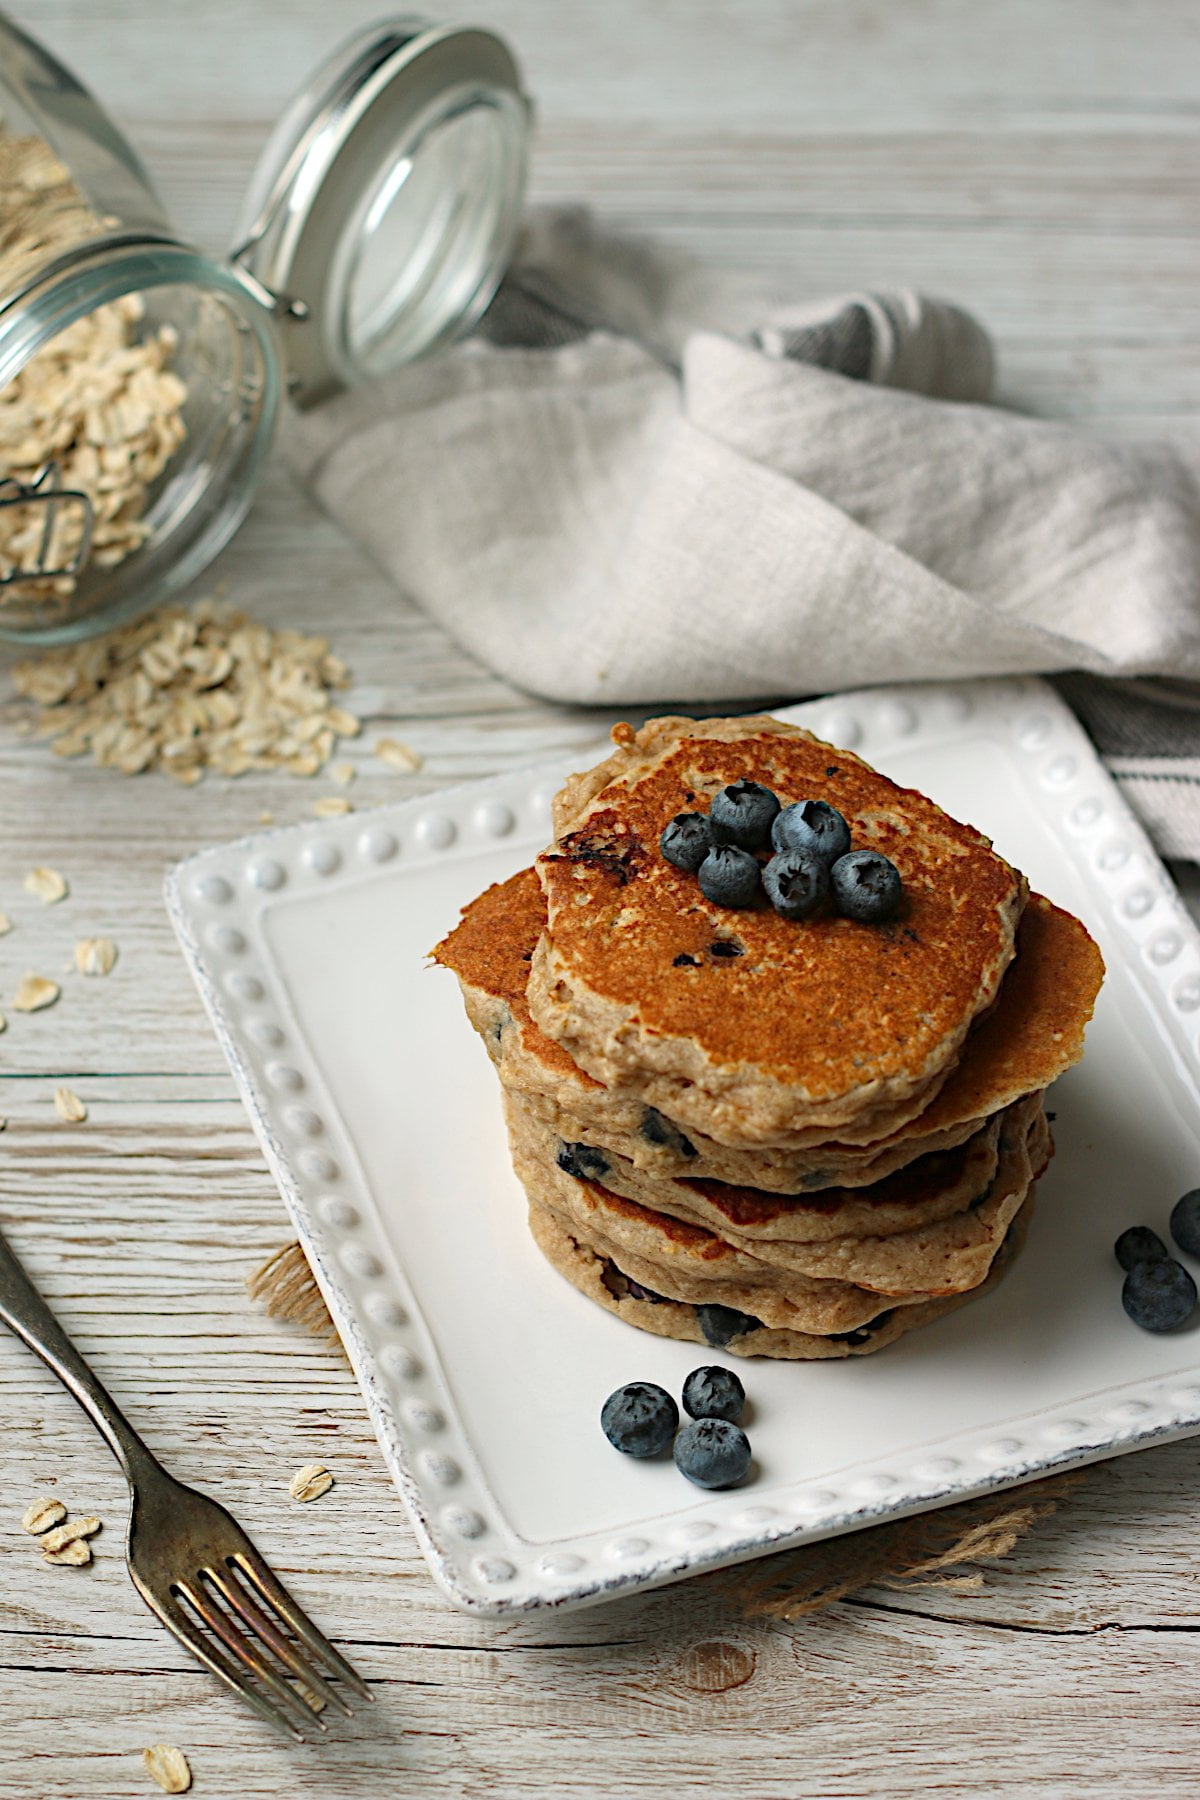 Blueberry oatmeal pancakes on a white plate.